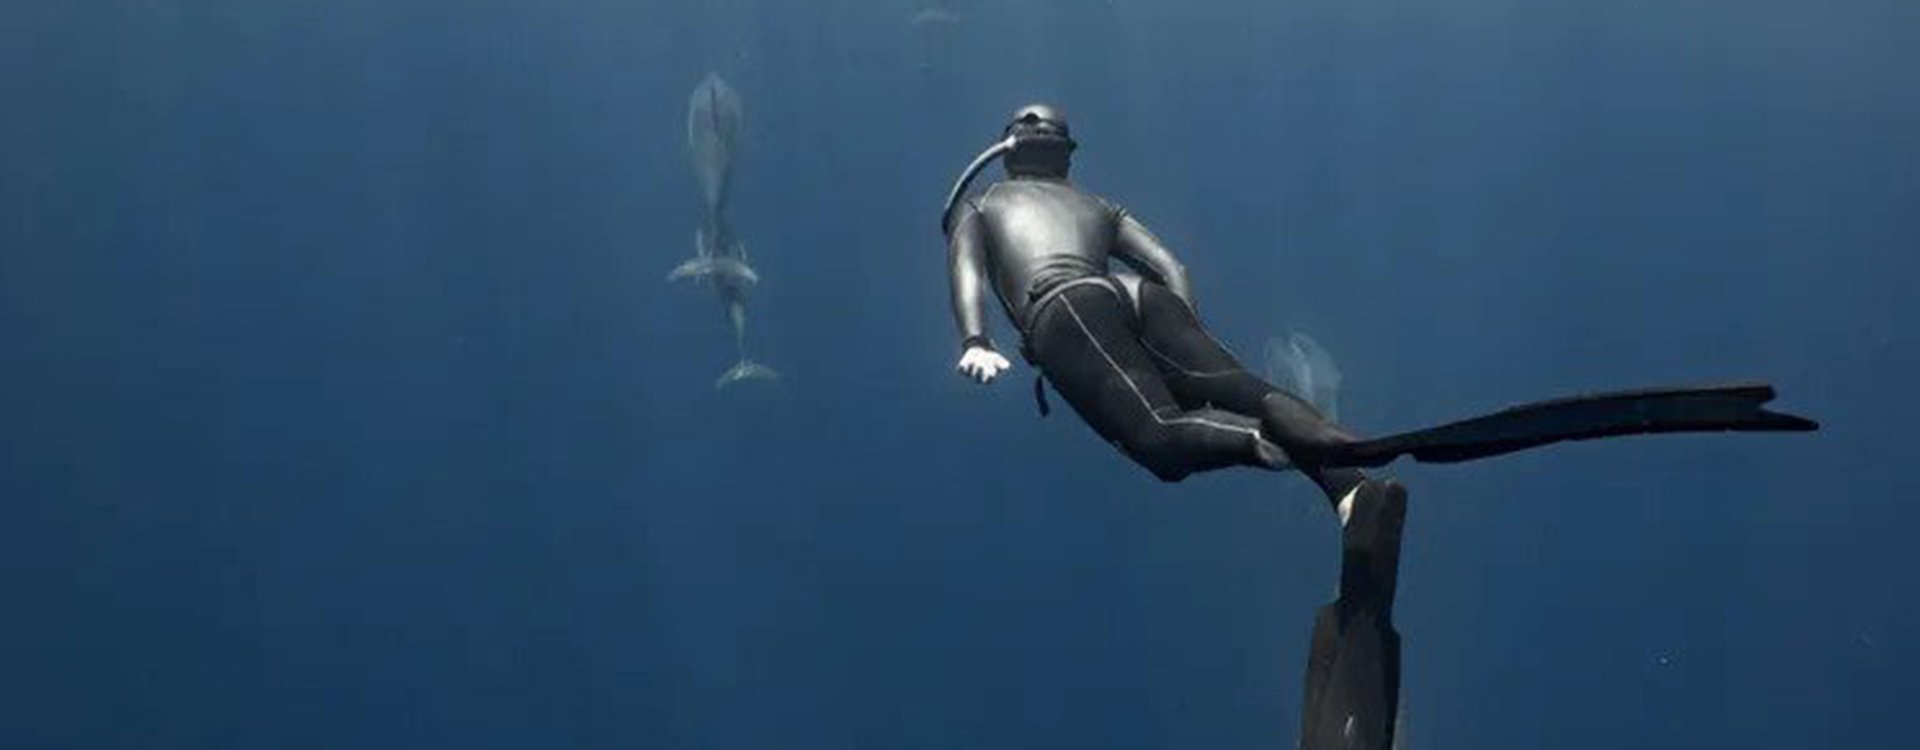 FREEDIVING WITH DOLPHINS IN HAWAII